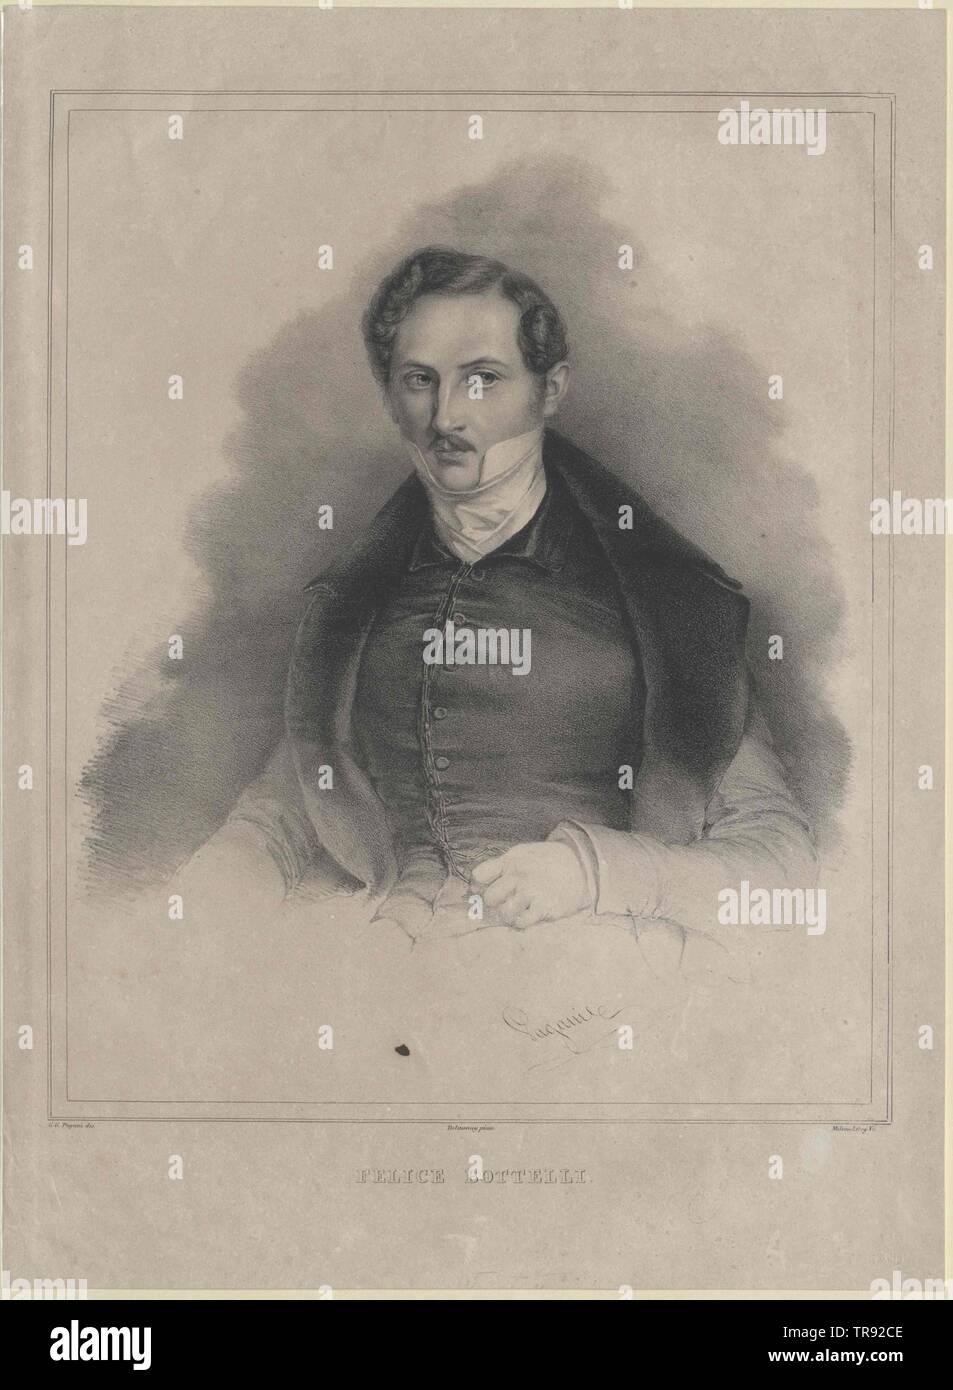 Botelli, Felice, opera singer at the Milanese Scala 1827-1840, Additional-Rights-Clearance-Info-Not-Available Stock Photo